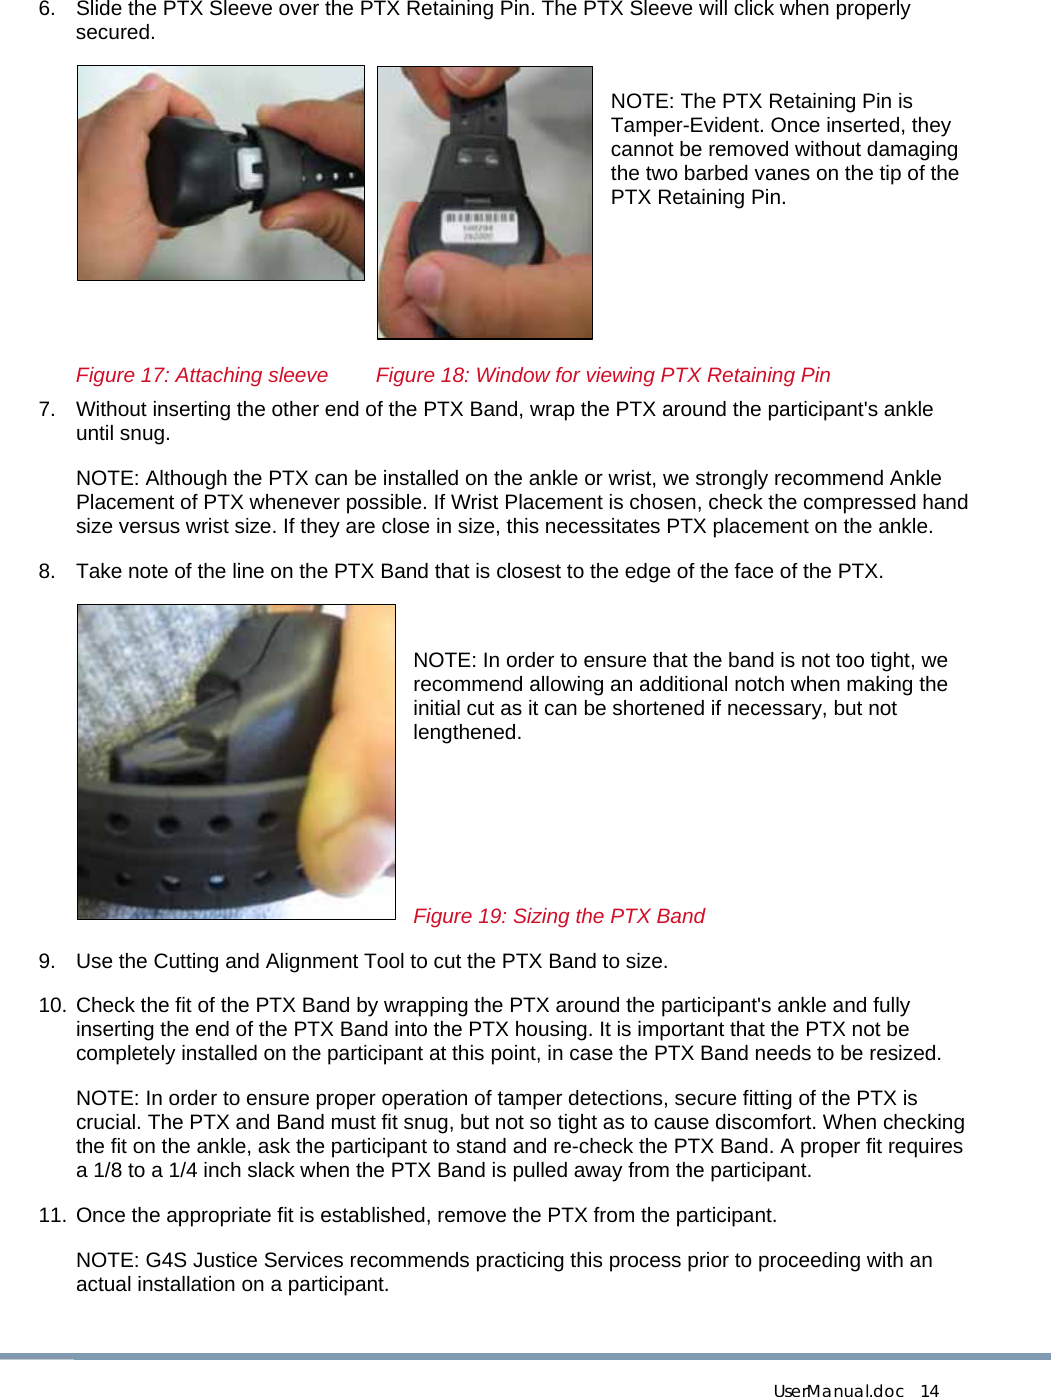  UserManual.doc   14 6.  Slide the PTX Sleeve over the PTX Retaining Pin. The PTX Sleeve will click when properly secured.   NOTE: The PTX Retaining Pin is Tamper-Evident. Once inserted, they cannot be removed without damaging the two barbed vanes on the tip of the PTX Retaining Pin.       Figure 17: Attaching sleeve   Figure 18: Window for viewing PTX Retaining Pin 7.  Without inserting the other end of the PTX Band, wrap the PTX around the participant&apos;s ankle until snug.  NOTE: Although the PTX can be installed on the ankle or wrist, we strongly recommend Ankle Placement of PTX whenever possible. If Wrist Placement is chosen, check the compressed hand size versus wrist size. If they are close in size, this necessitates PTX placement on the ankle. 8.  Take note of the line on the PTX Band that is closest to the edge of the face of the PTX.  NOTE: In order to ensure that the band is not too tight, we recommend allowing an additional notch when making the initial cut as it can be shortened if necessary, but not lengthened.    Figure 19: Sizing the PTX Band 9.  Use the Cutting and Alignment Tool to cut the PTX Band to size. 10. Check the fit of the PTX Band by wrapping the PTX around the participant&apos;s ankle and fully inserting the end of the PTX Band into the PTX housing. It is important that the PTX not be completely installed on the participant at this point, in case the PTX Band needs to be resized. NOTE: In order to ensure proper operation of tamper detections, secure fitting of the PTX is crucial. The PTX and Band must fit snug, but not so tight as to cause discomfort. When checking the fit on the ankle, ask the participant to stand and re-check the PTX Band. A proper fit requires a 1/8 to a 1/4 inch slack when the PTX Band is pulled away from the participant. 11. Once the appropriate fit is established, remove the PTX from the participant. NOTE: G4S Justice Services recommends practicing this process prior to proceeding with an actual installation on a participant.   